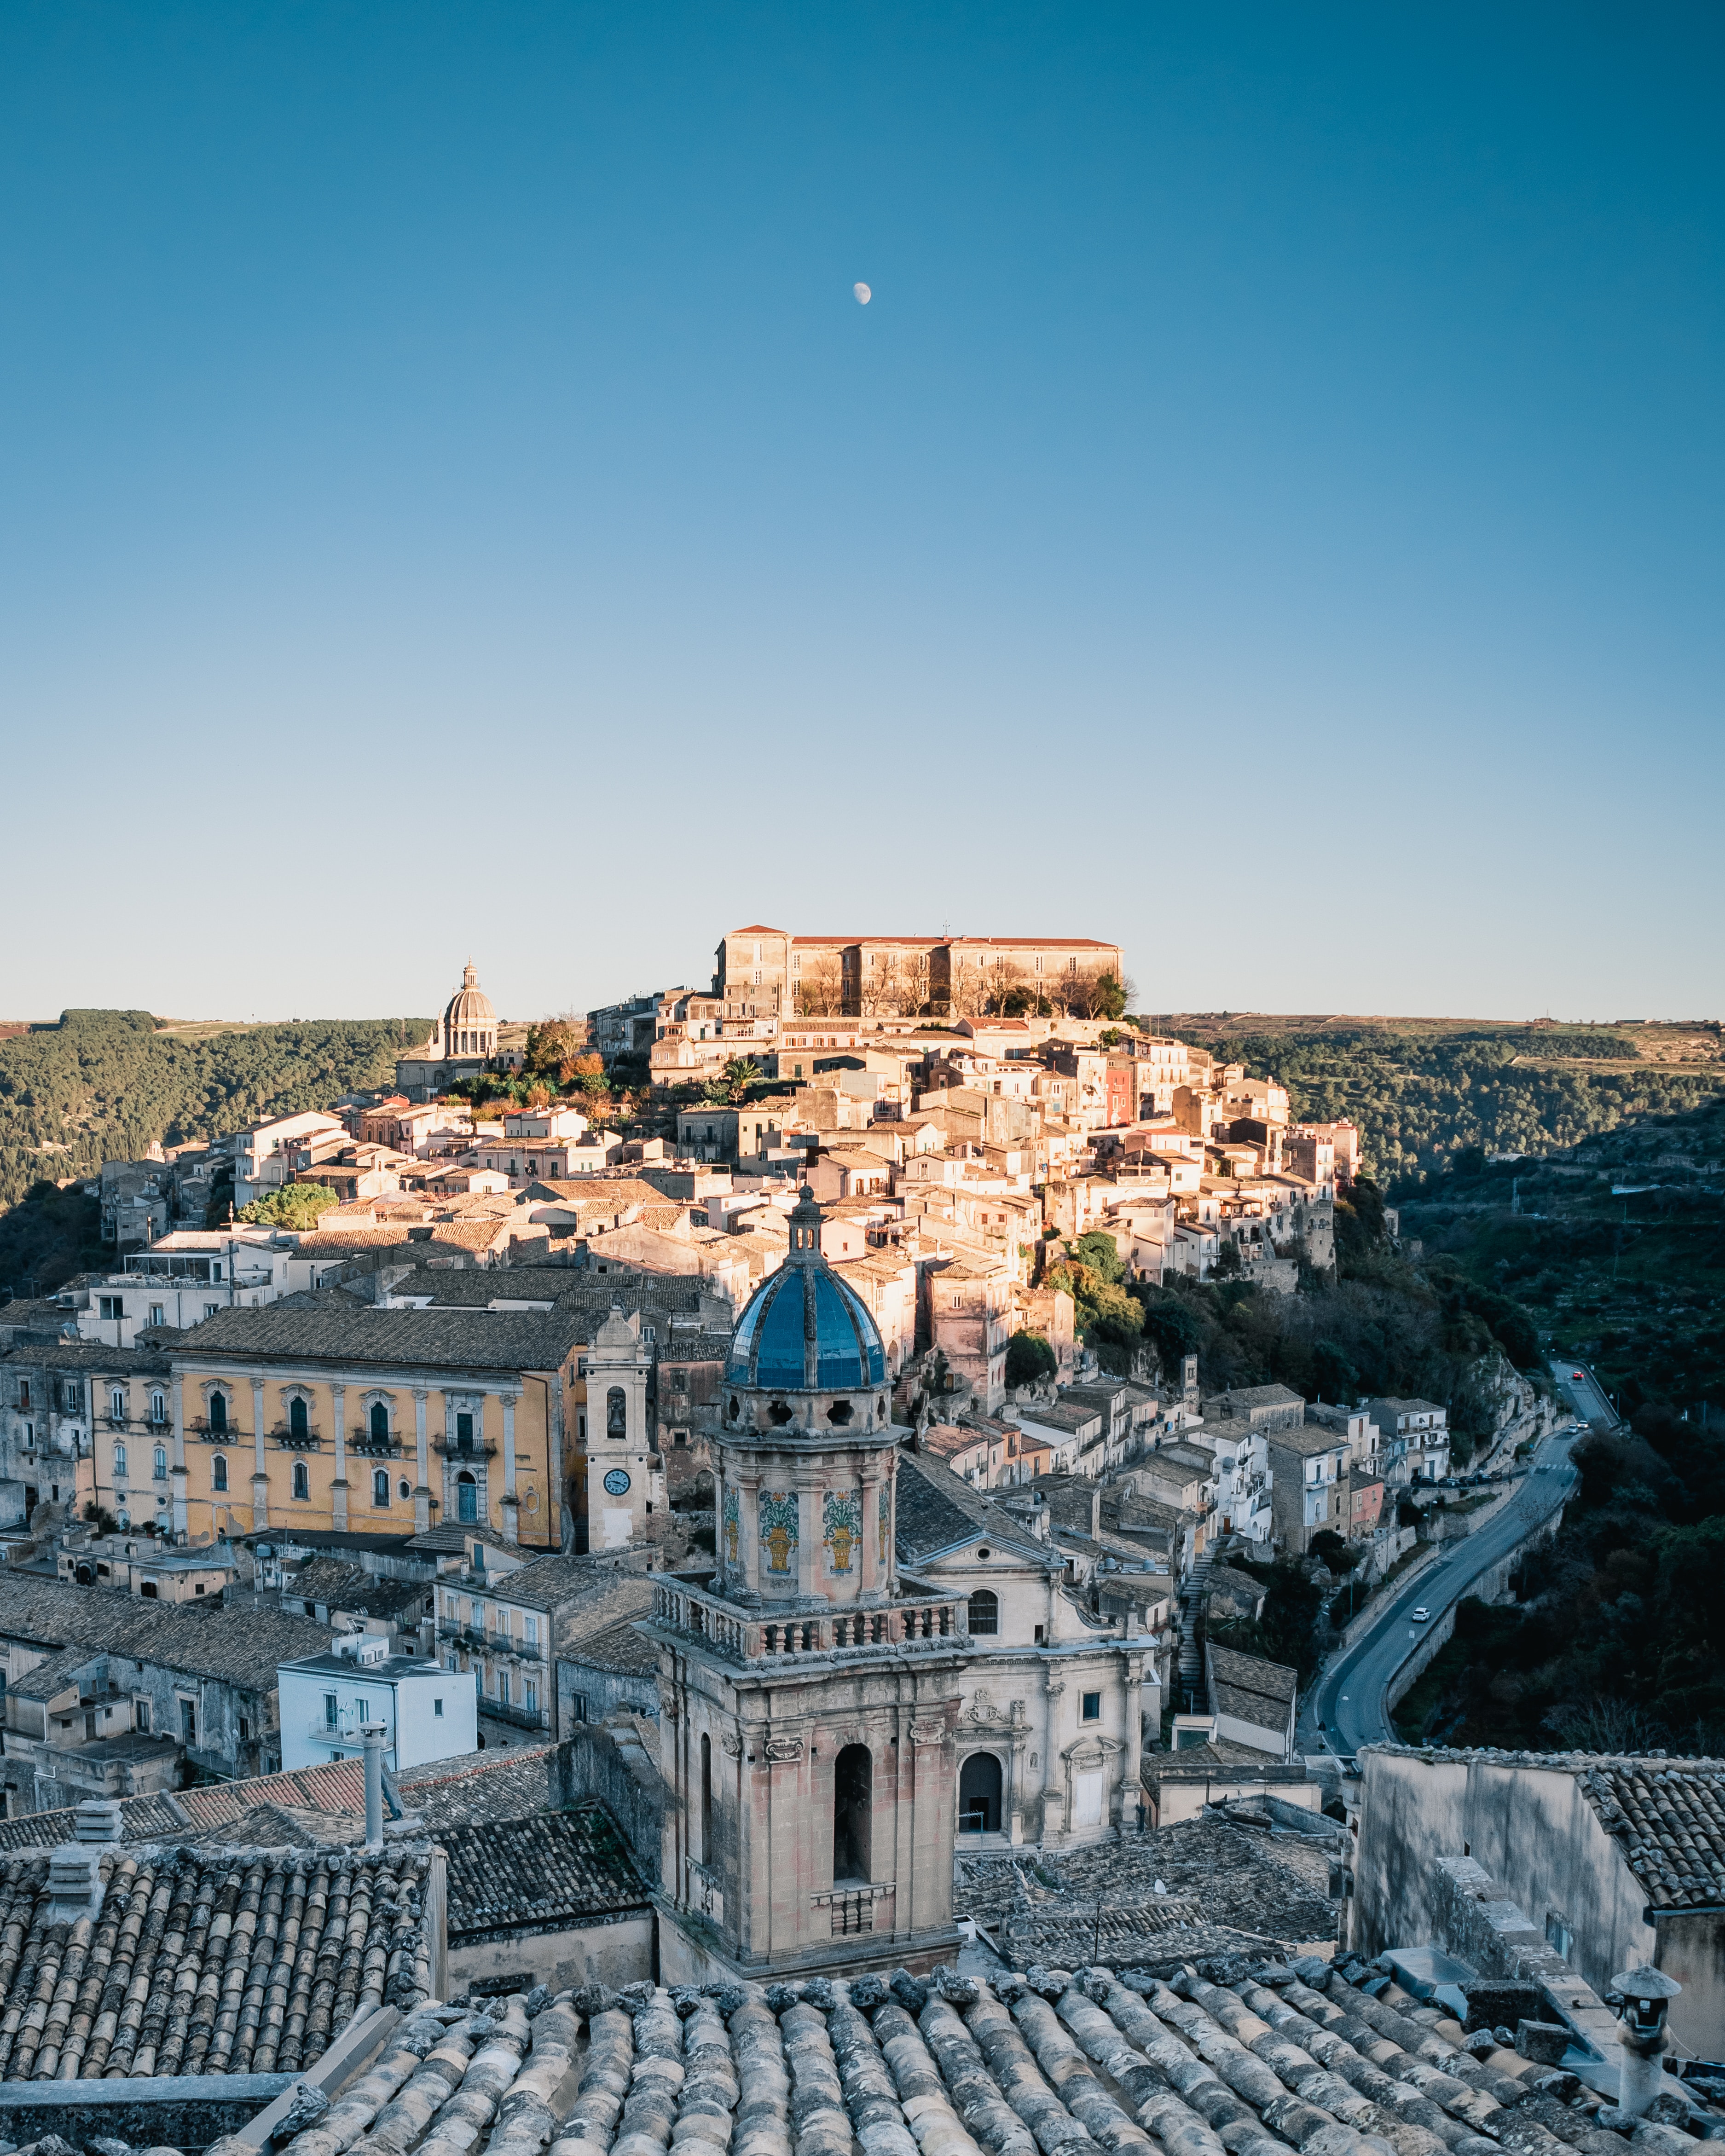 view from above, cities, architecture, italy, city, building, ragusa